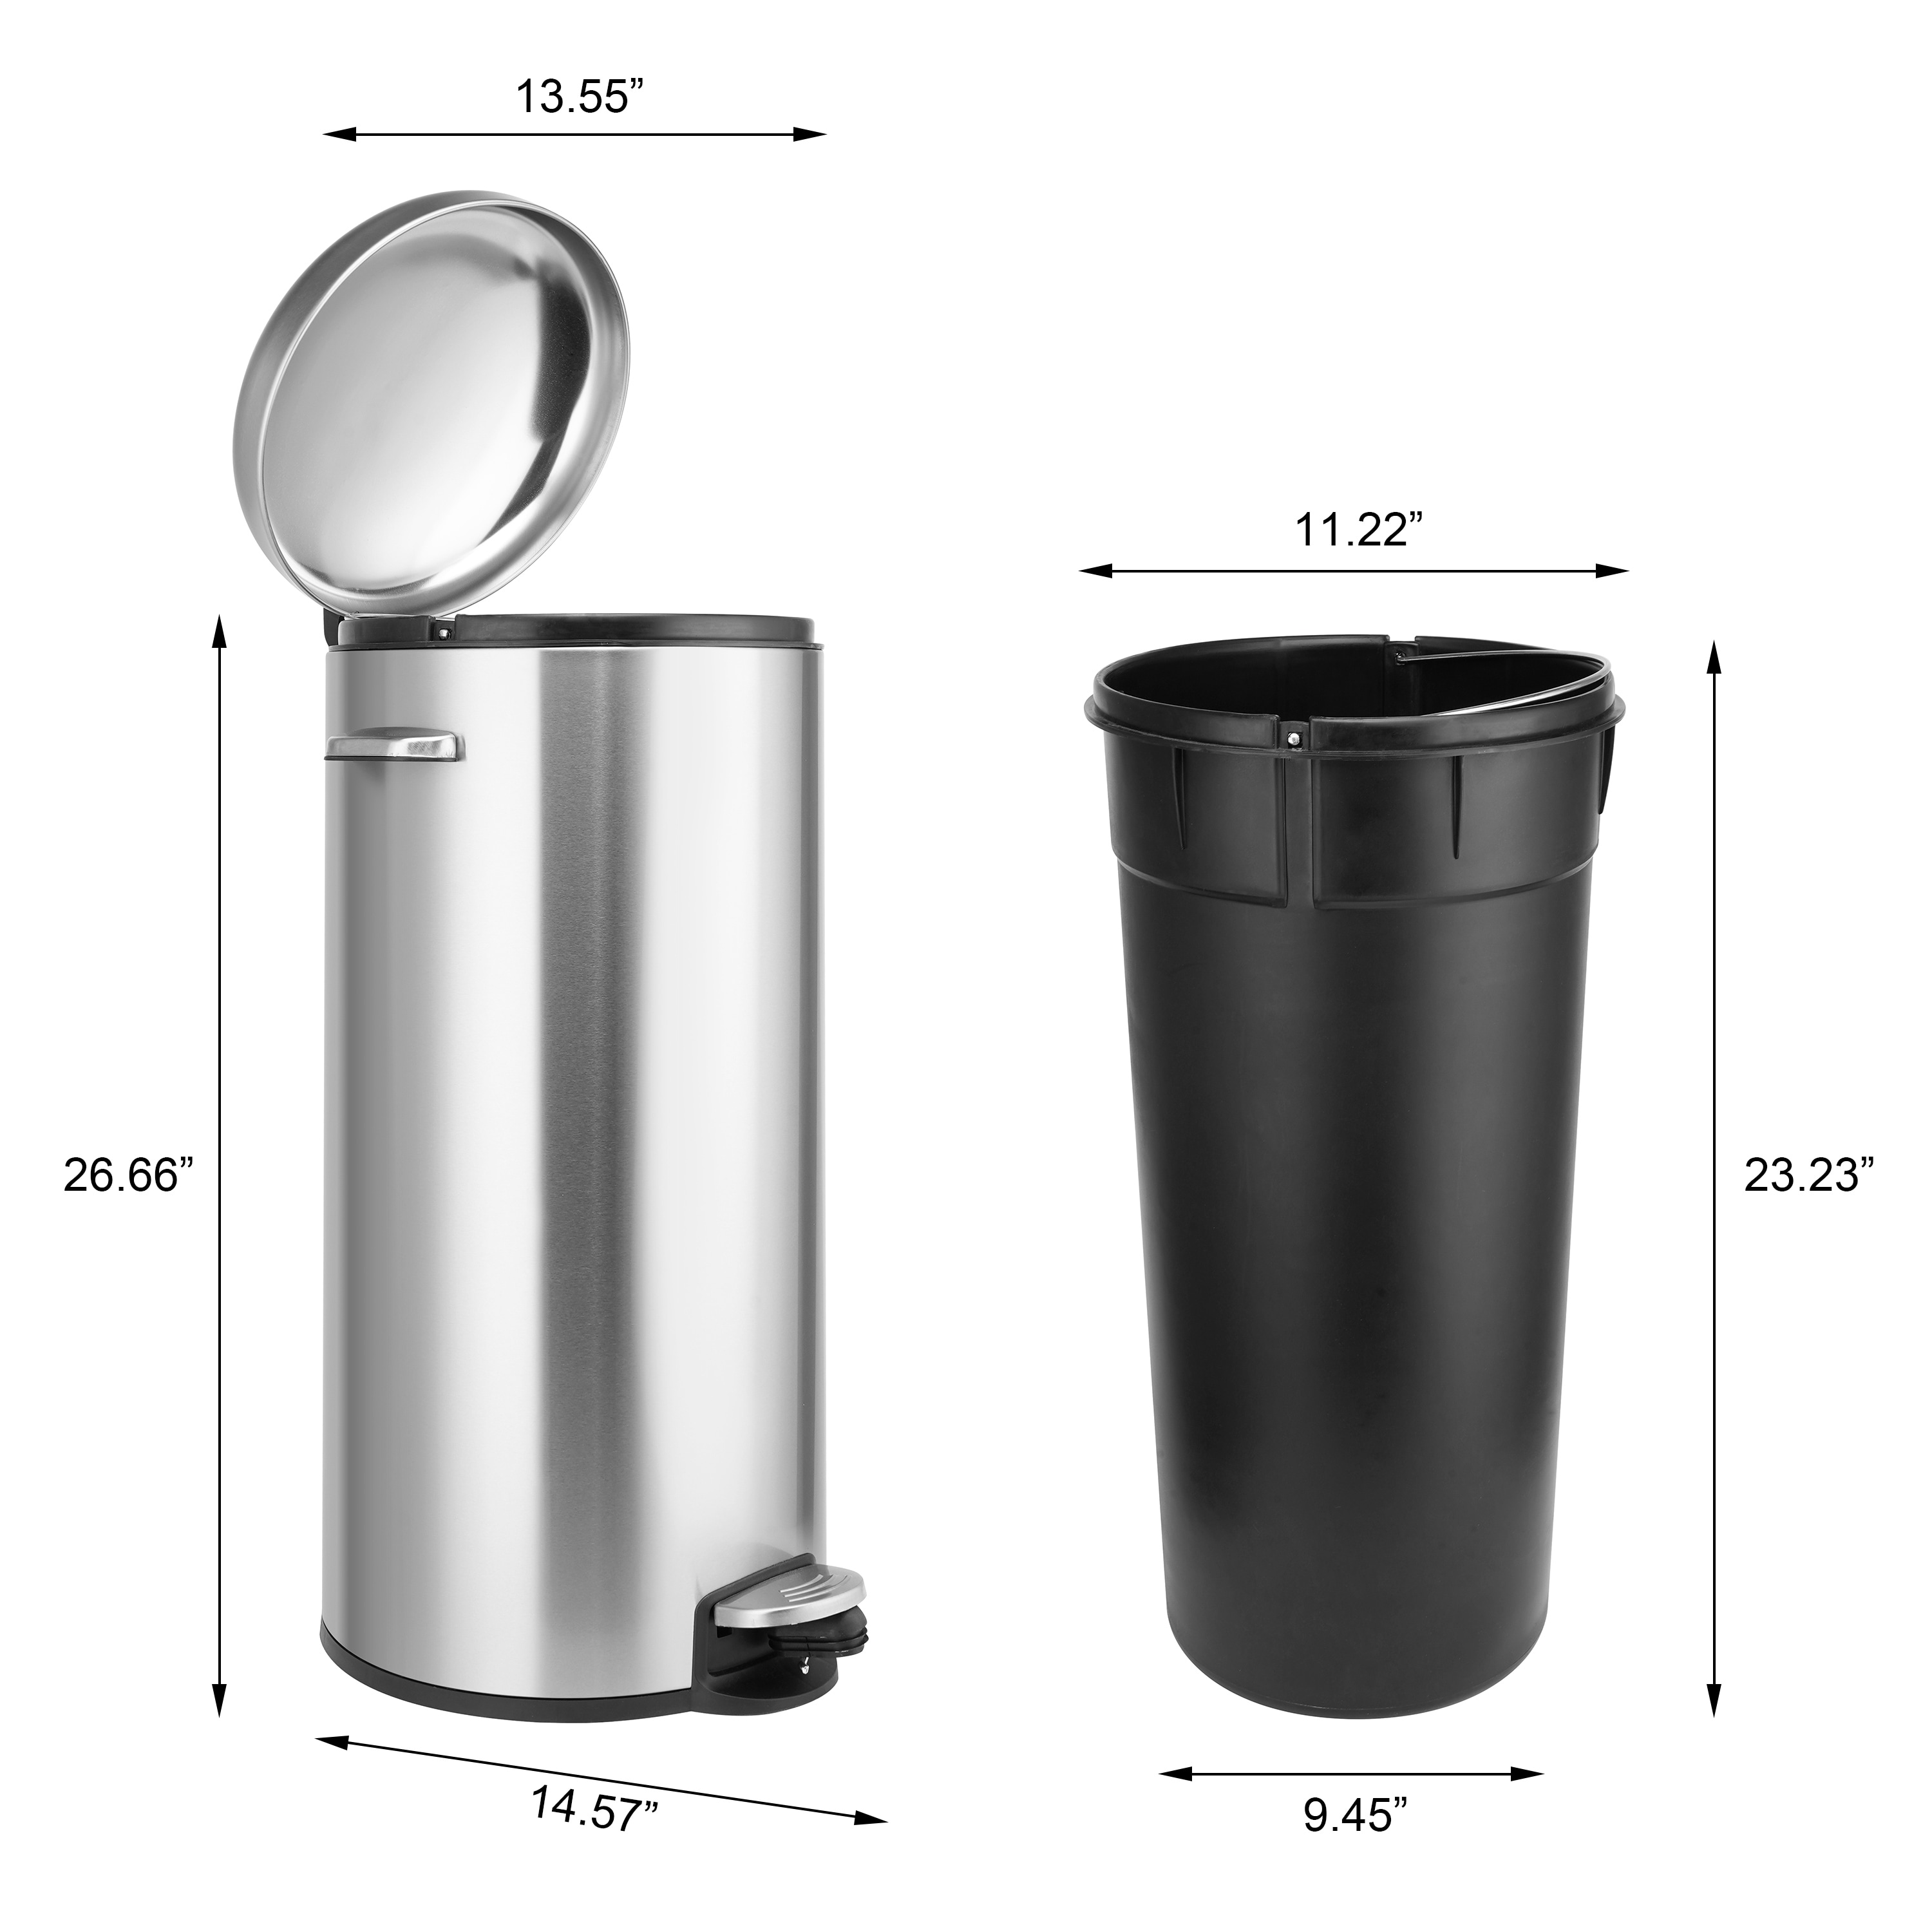 https://ak1.ostkcdn.com/images/products/is/images/direct/e215b2920b0696536c87f096f3b3d7de2cee4c7f/Innovaze-8-Gallon-Stainless-Steel-Round-Shape-Step-on-Kitchen-Trash-Can.jpg